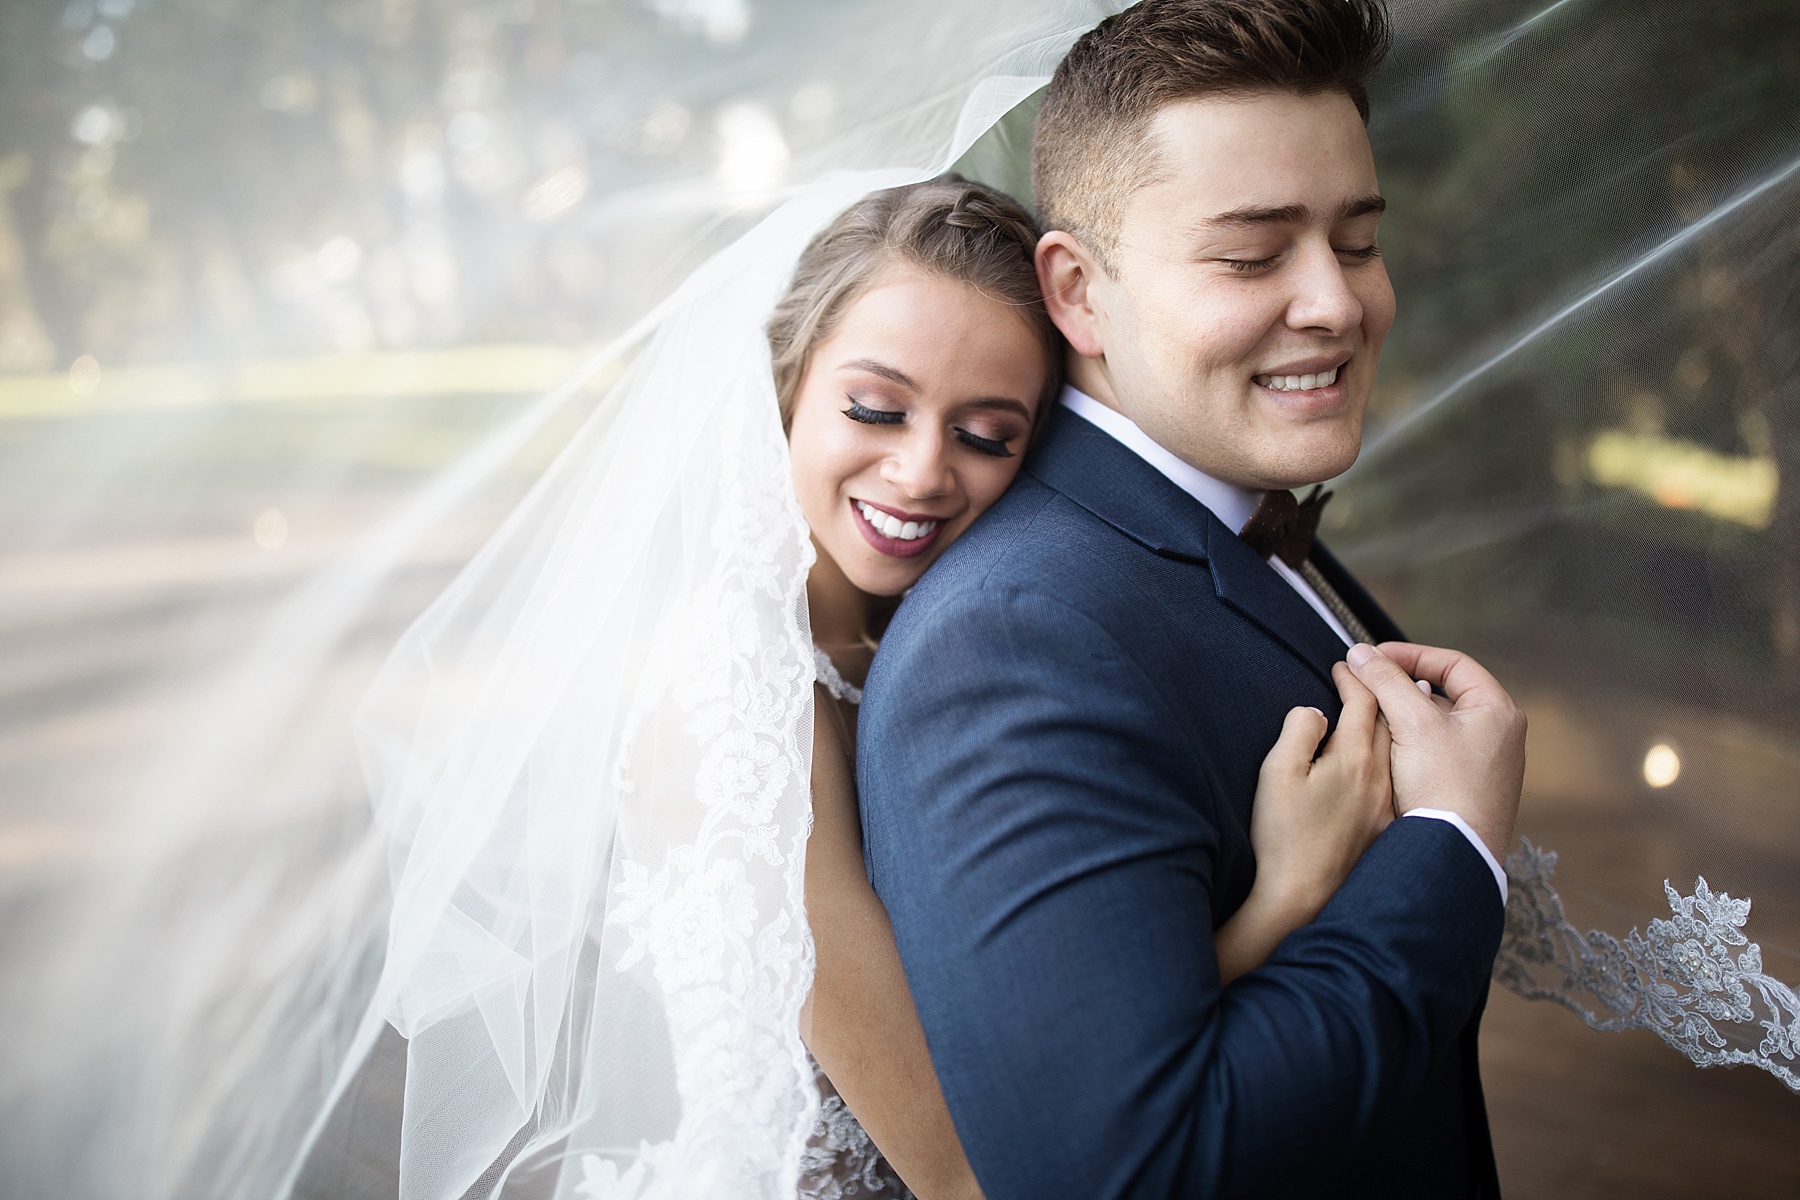 How To Create Those Super Romantic Under The Veil Portraits